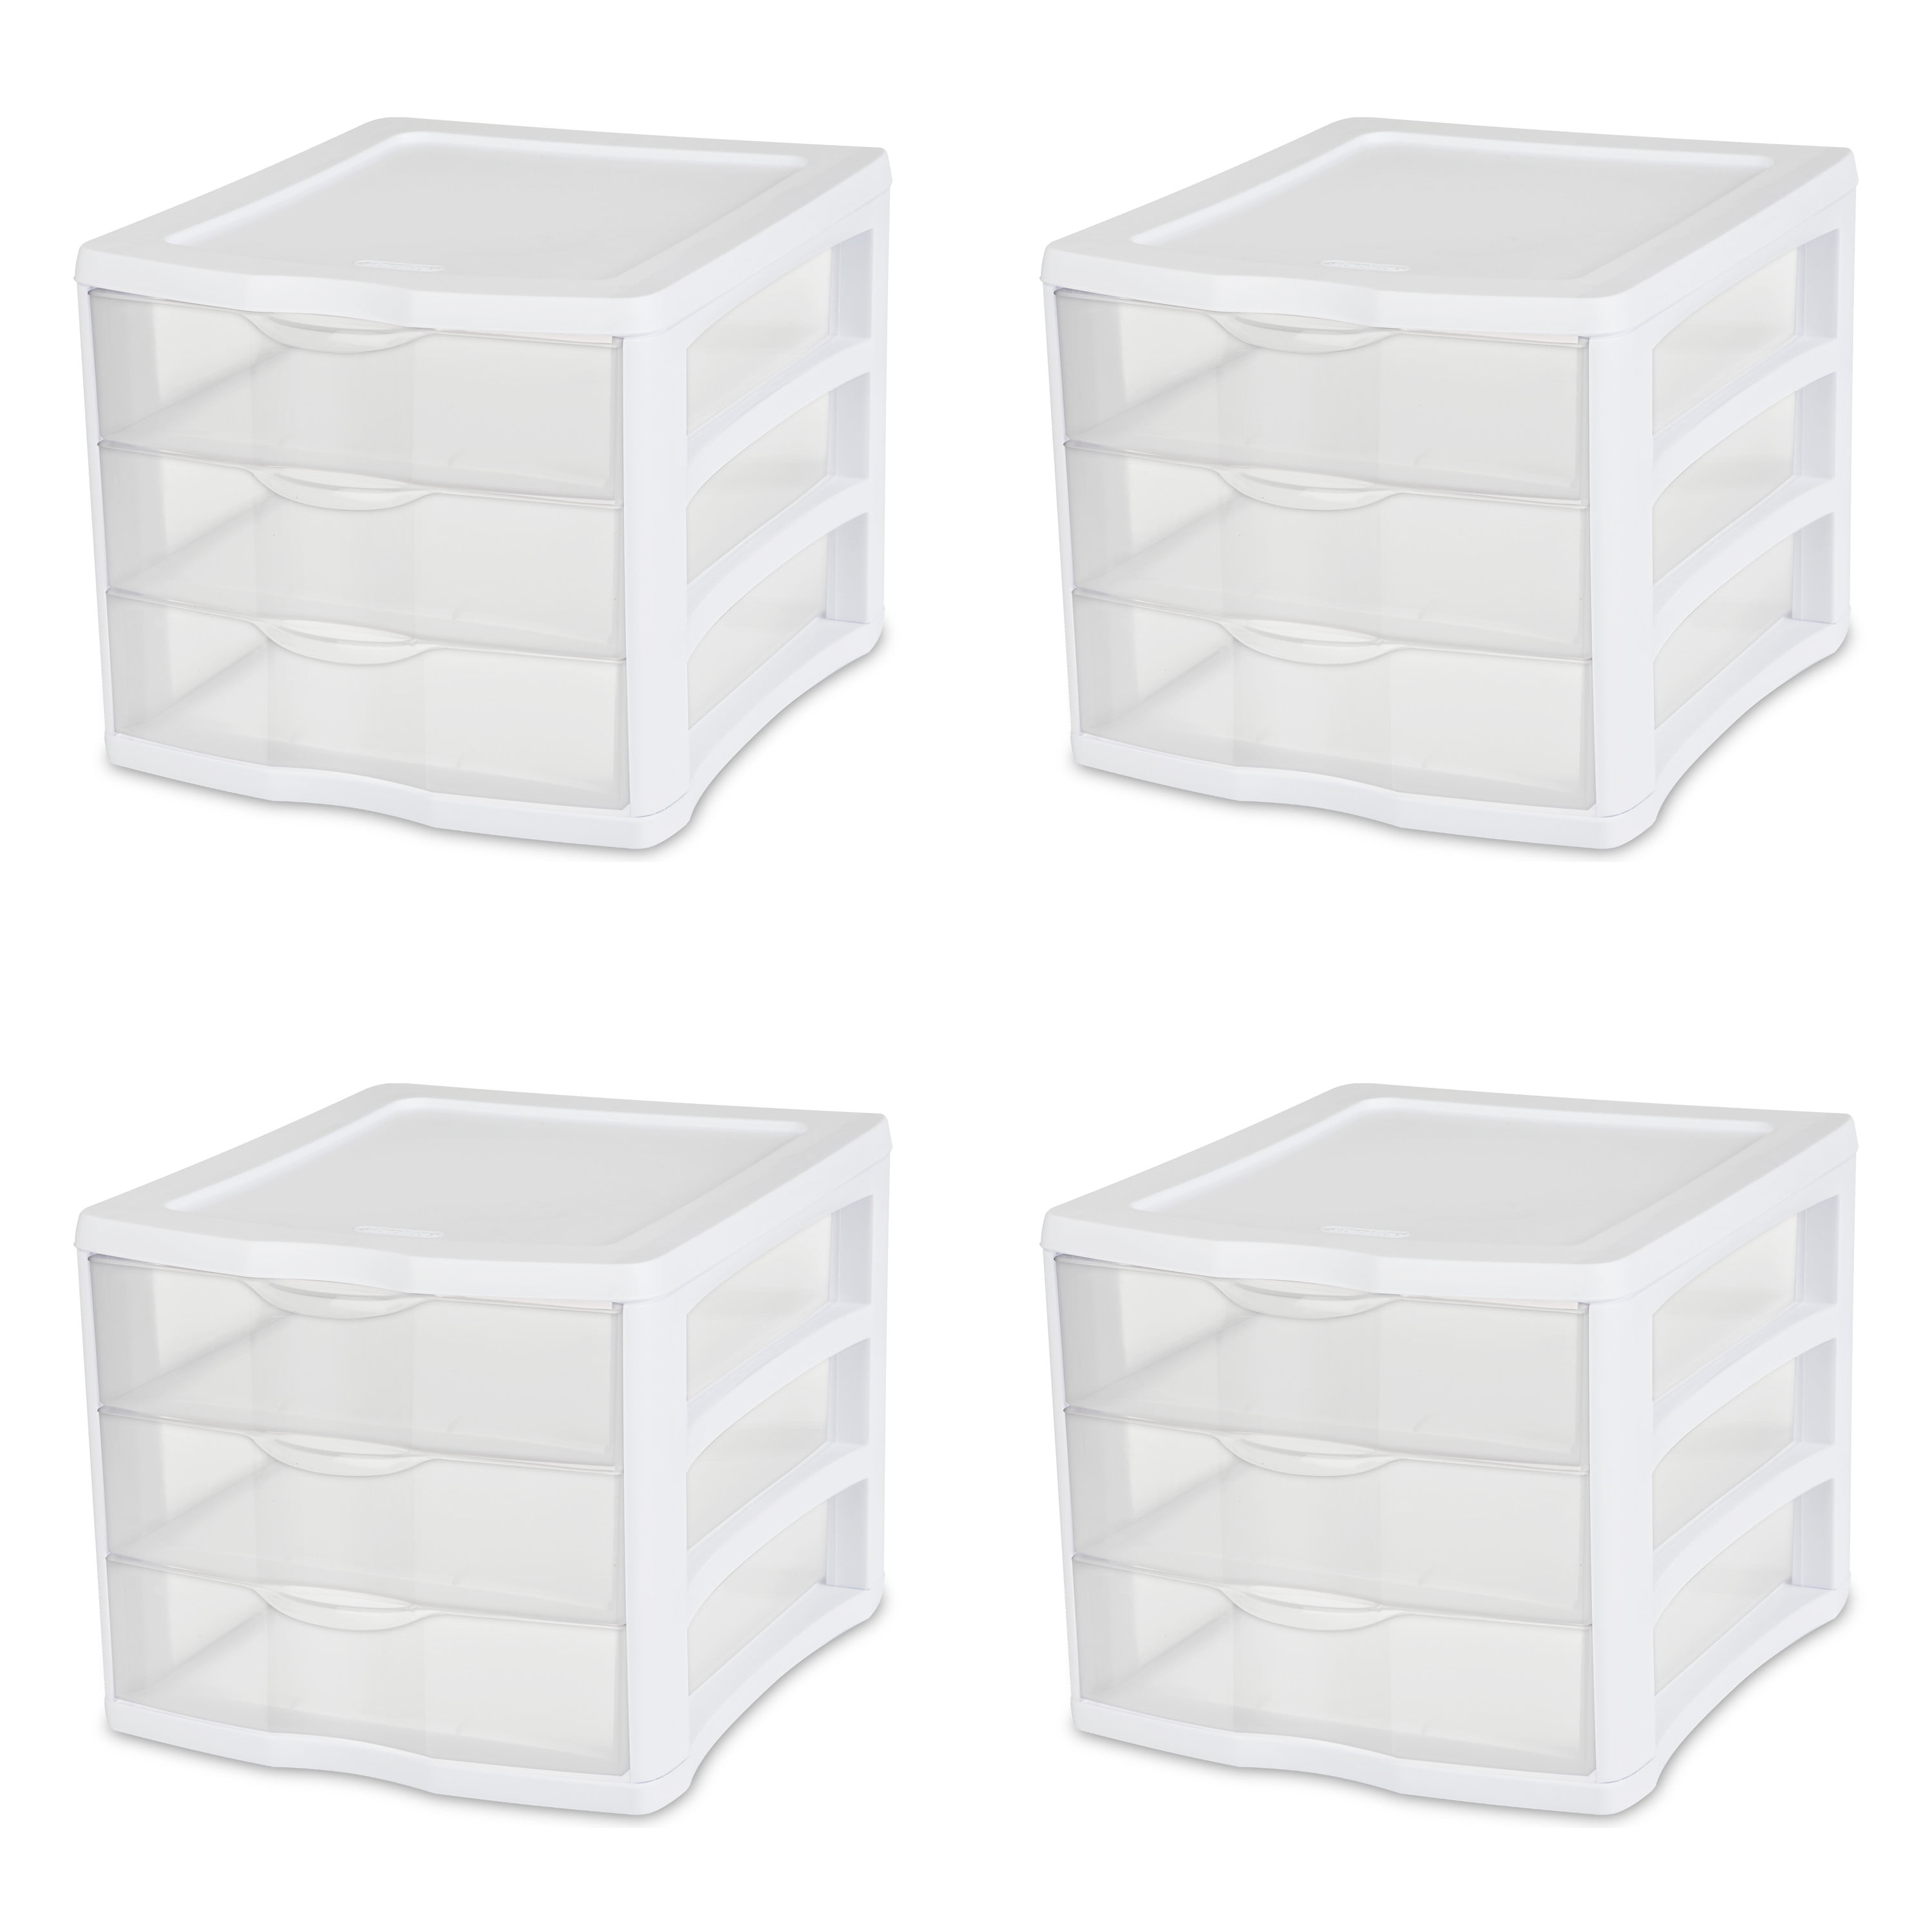 Massca 5 Drawer Storage Drawers and Personal Organizer, Heavy-Duty Plastic  Containers for Storing Arts, Crafts, Sewing Accessories, Stationary, and